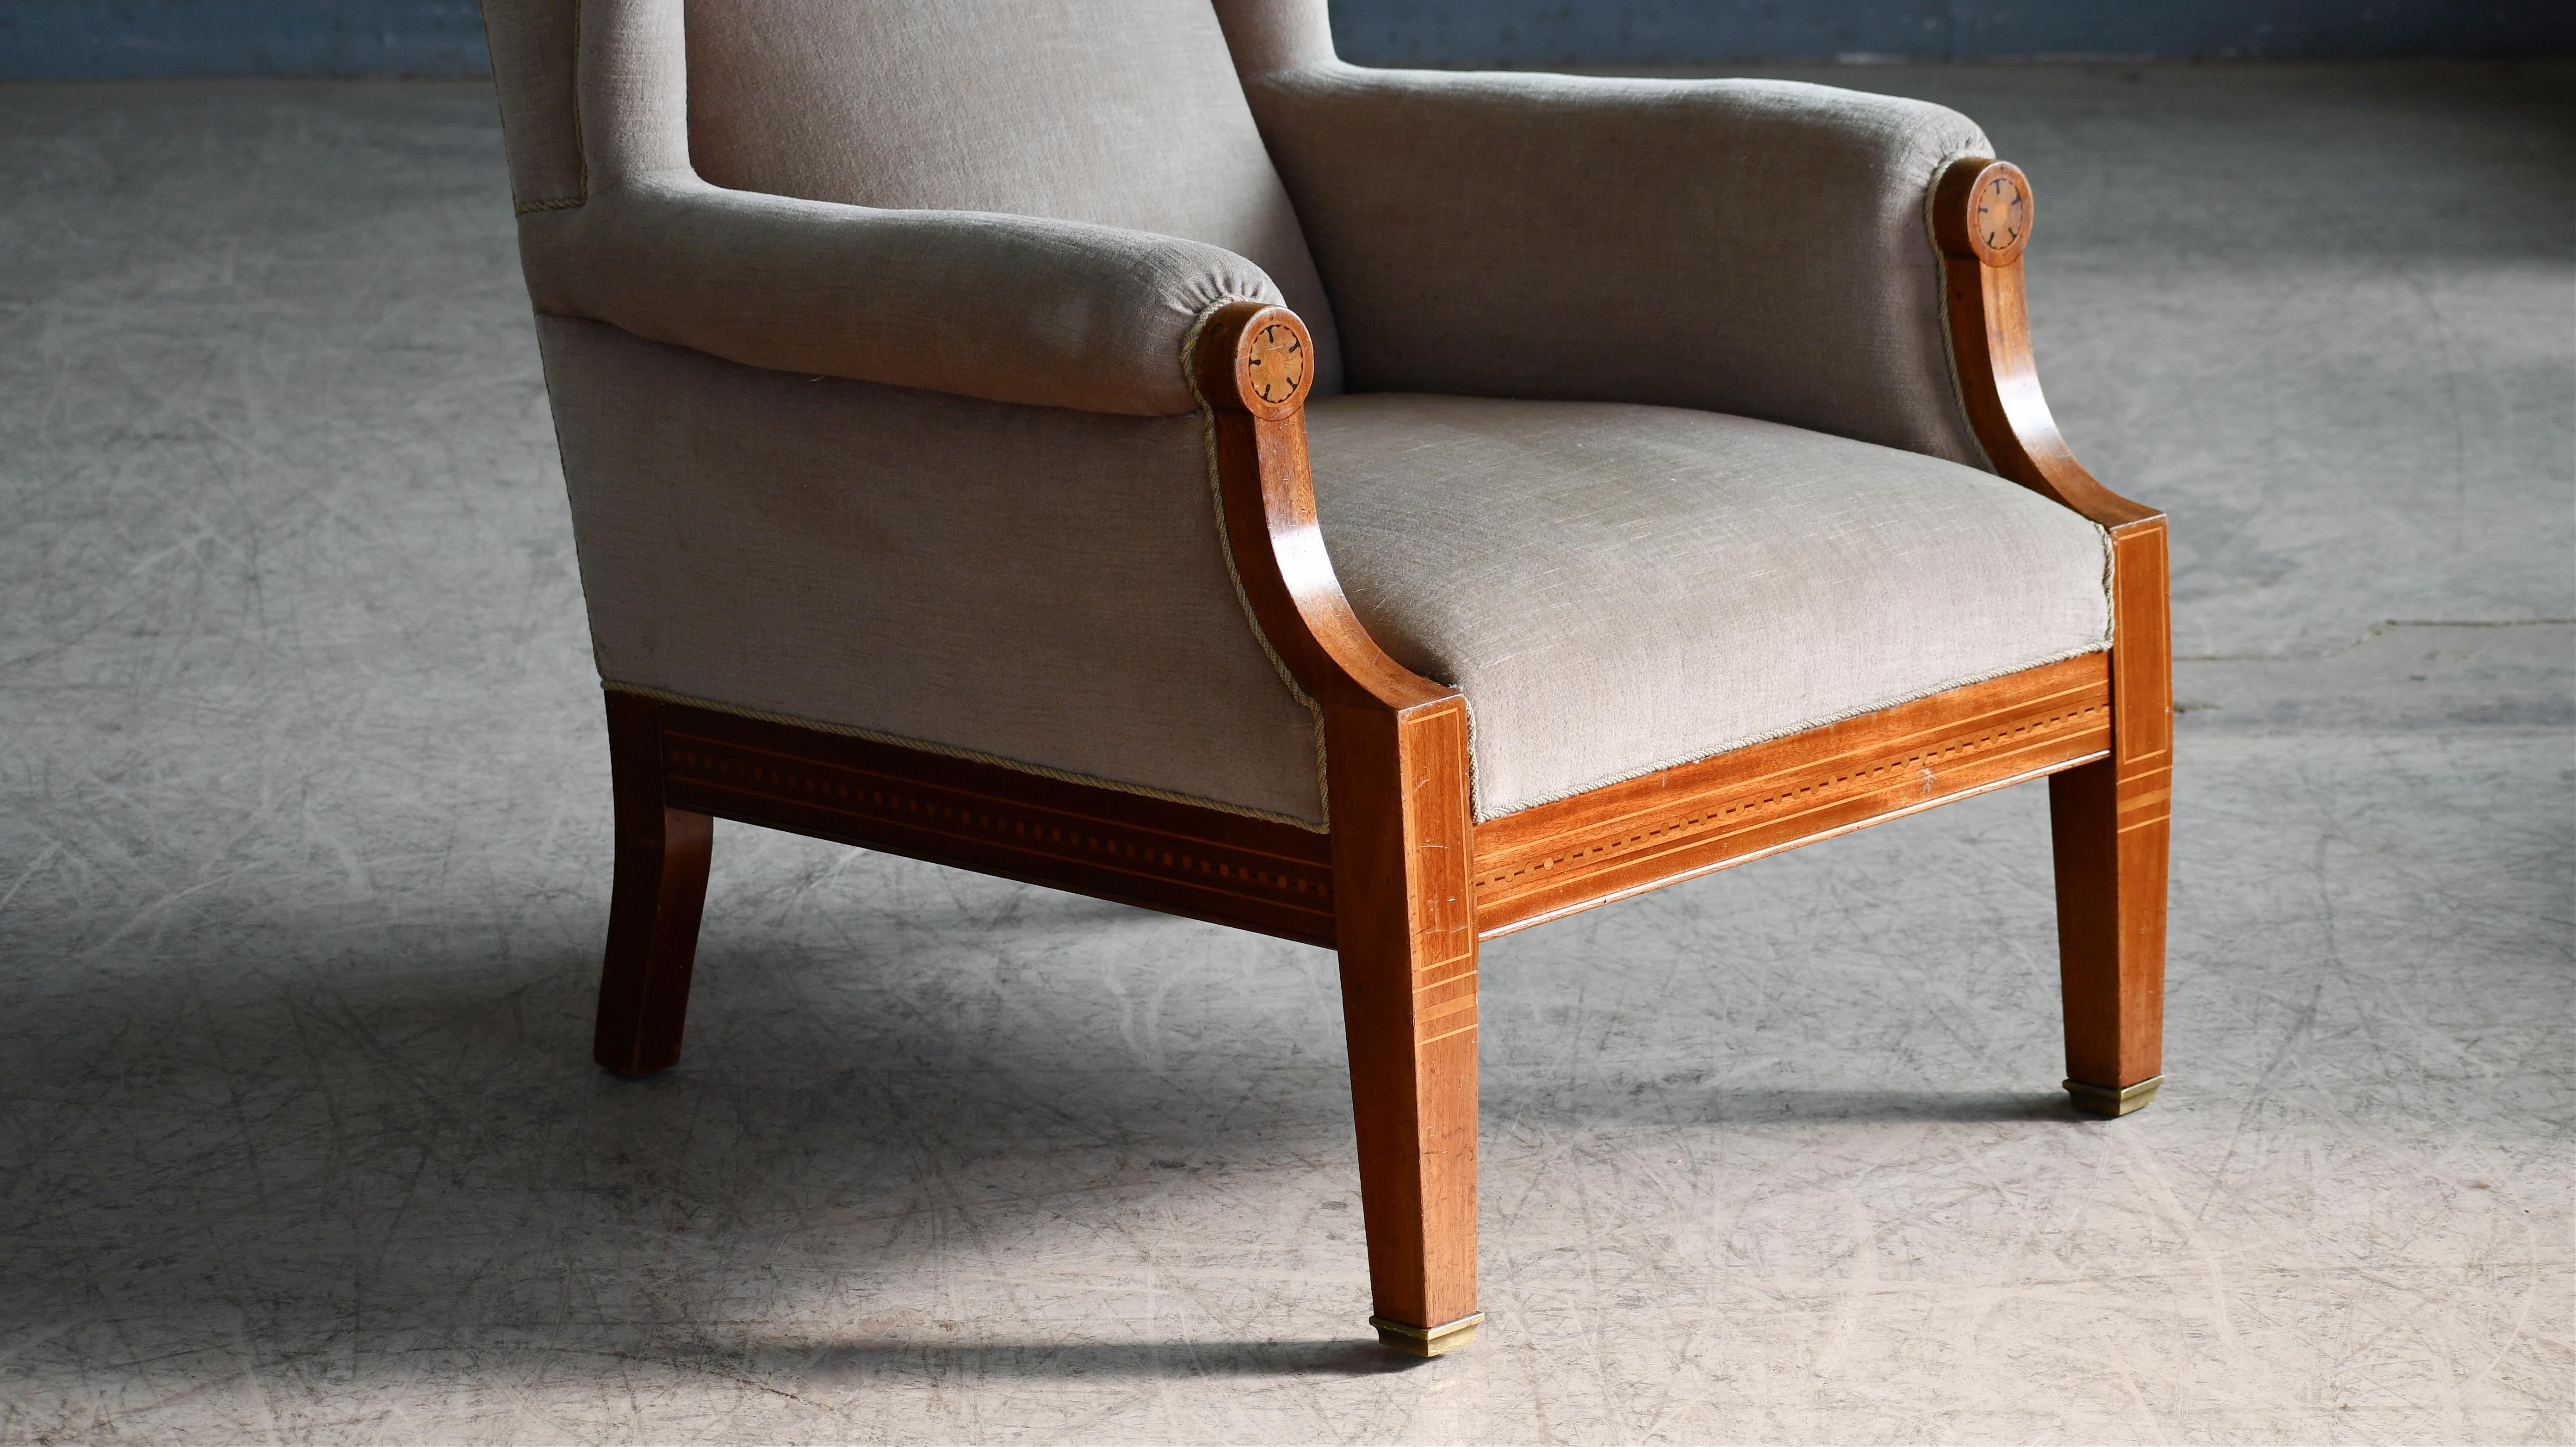 Mid-20th Century Danish Wingback Chair in Mohair and Mahogany with Marquetry ca. 1930's For Sale